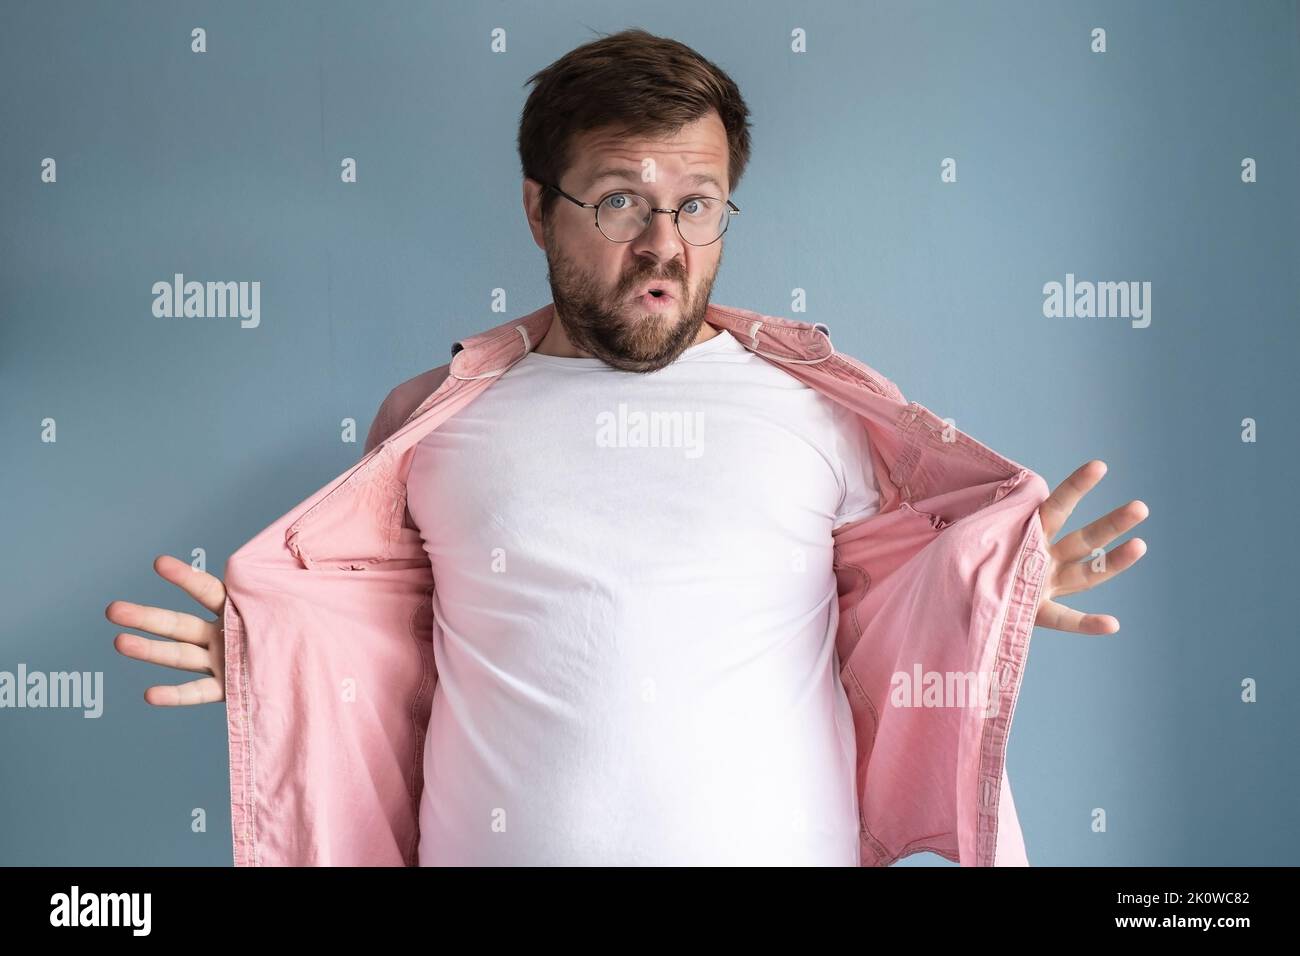 Overweight man opens shirt and shows his excess belly fat, with a strange expression on face. Healthy lifestyle concept. Stock Photo